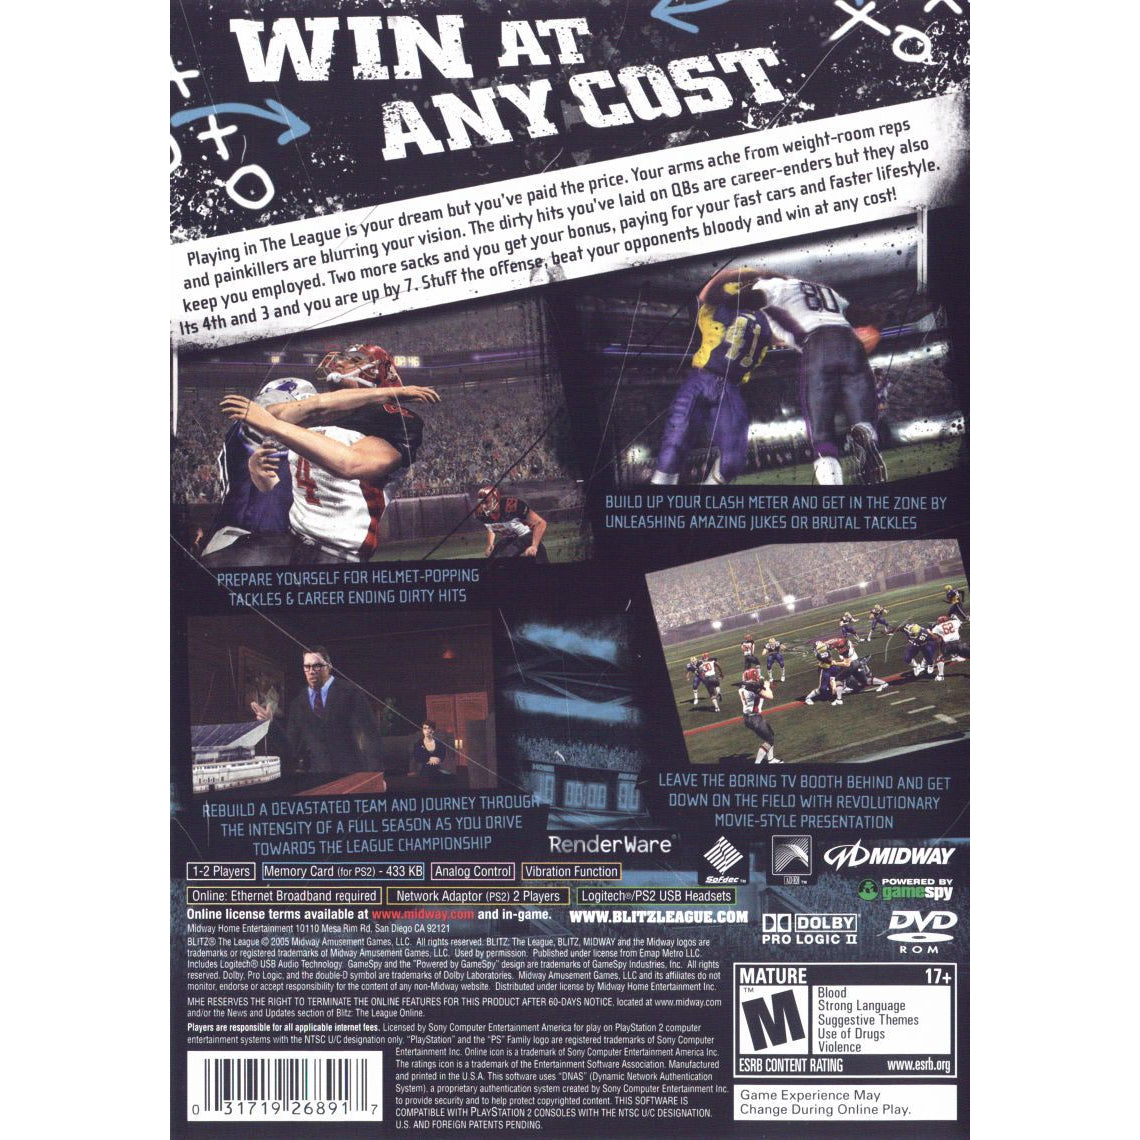 Blitz: The League - PlayStation 2 (PS2) Game Complete - YourGamingShop.com - Buy, Sell, Trade Video Games Online. 120 Day Warranty. Satisfaction Guaranteed.